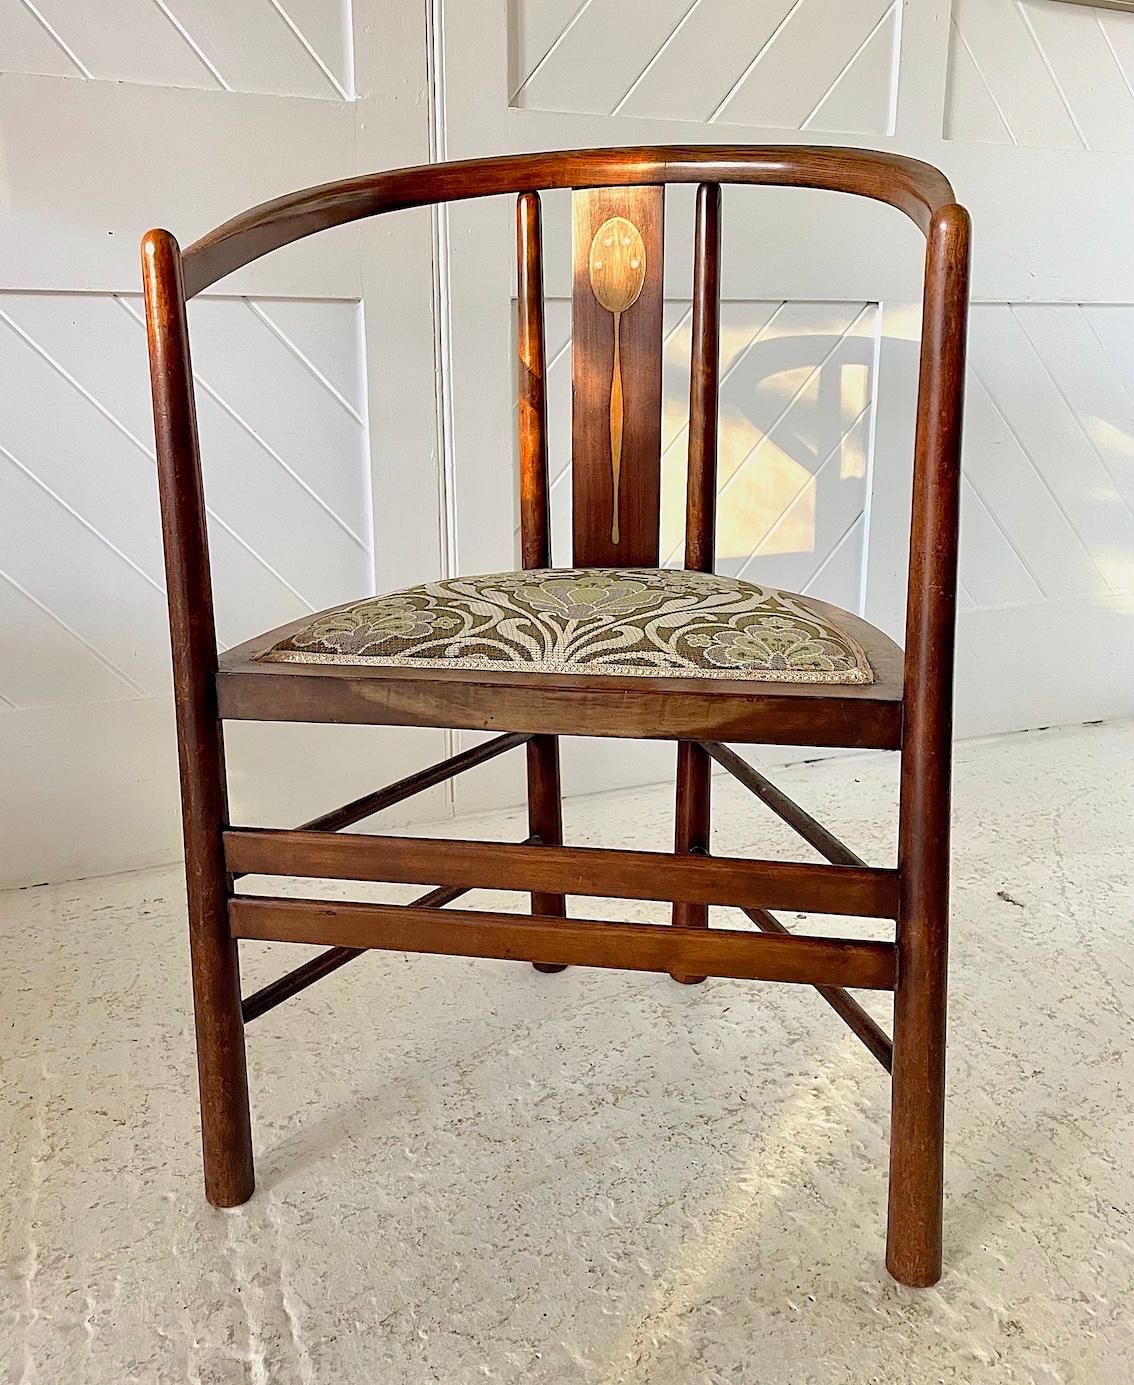 Glasgow School steamed ash and beech armchair

With stylised peacock inlay decoration

Mahogany back splat inlaid with mother of pearl and boxwood

Tapering flared legs and double stretcher

Upholstered in Art Nouveau fabric

Circa 1900

Height